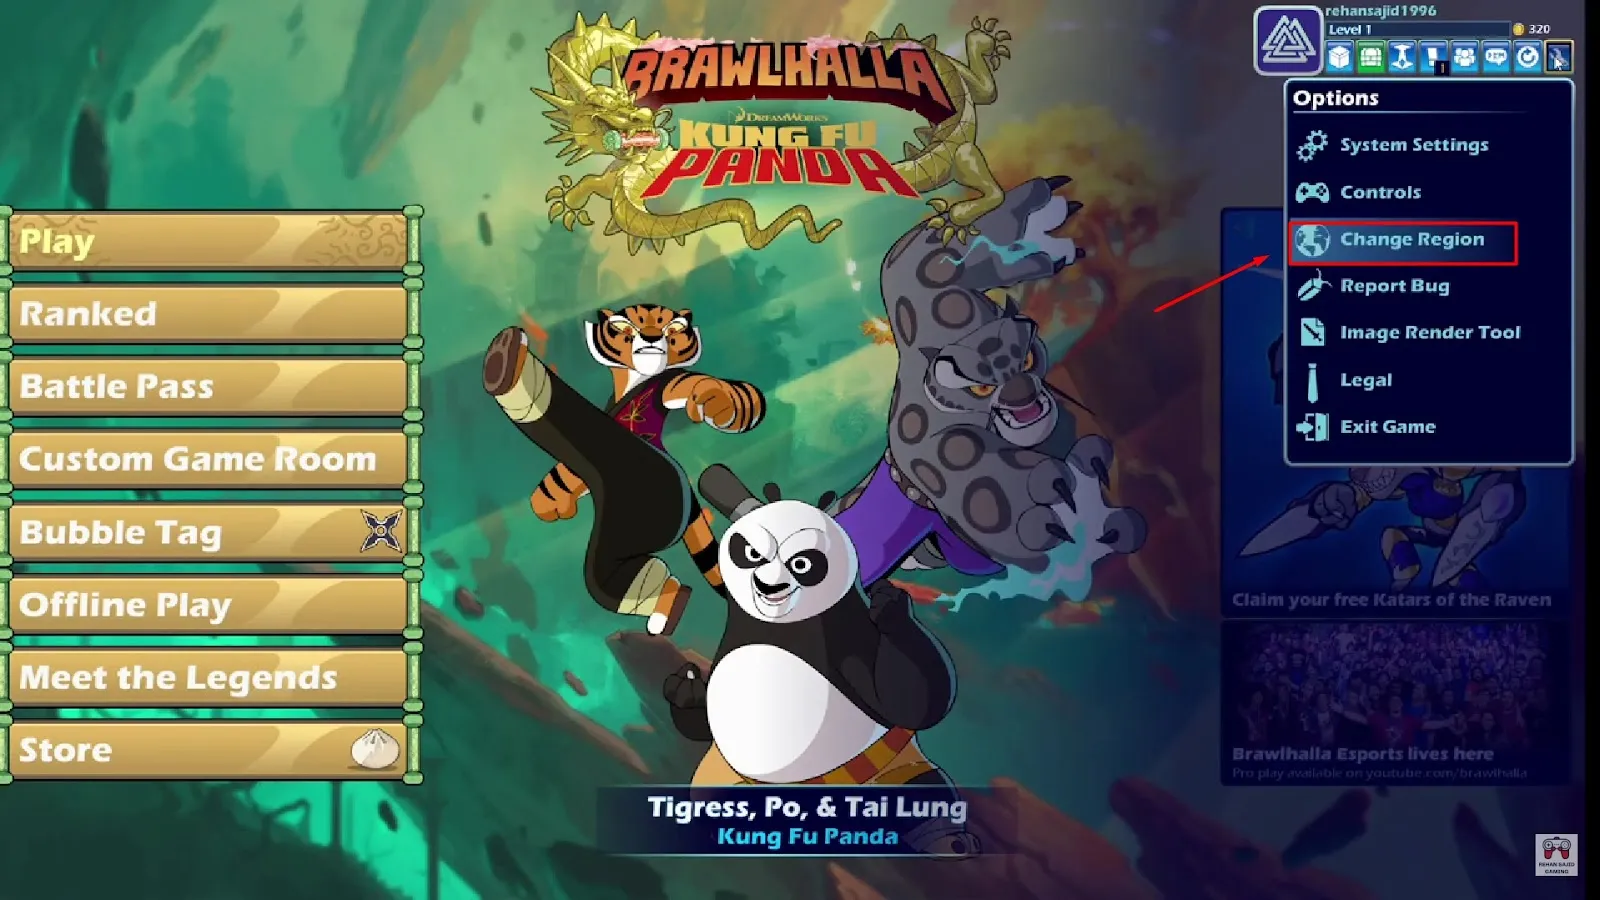 How to change servers in Brawlhalla?